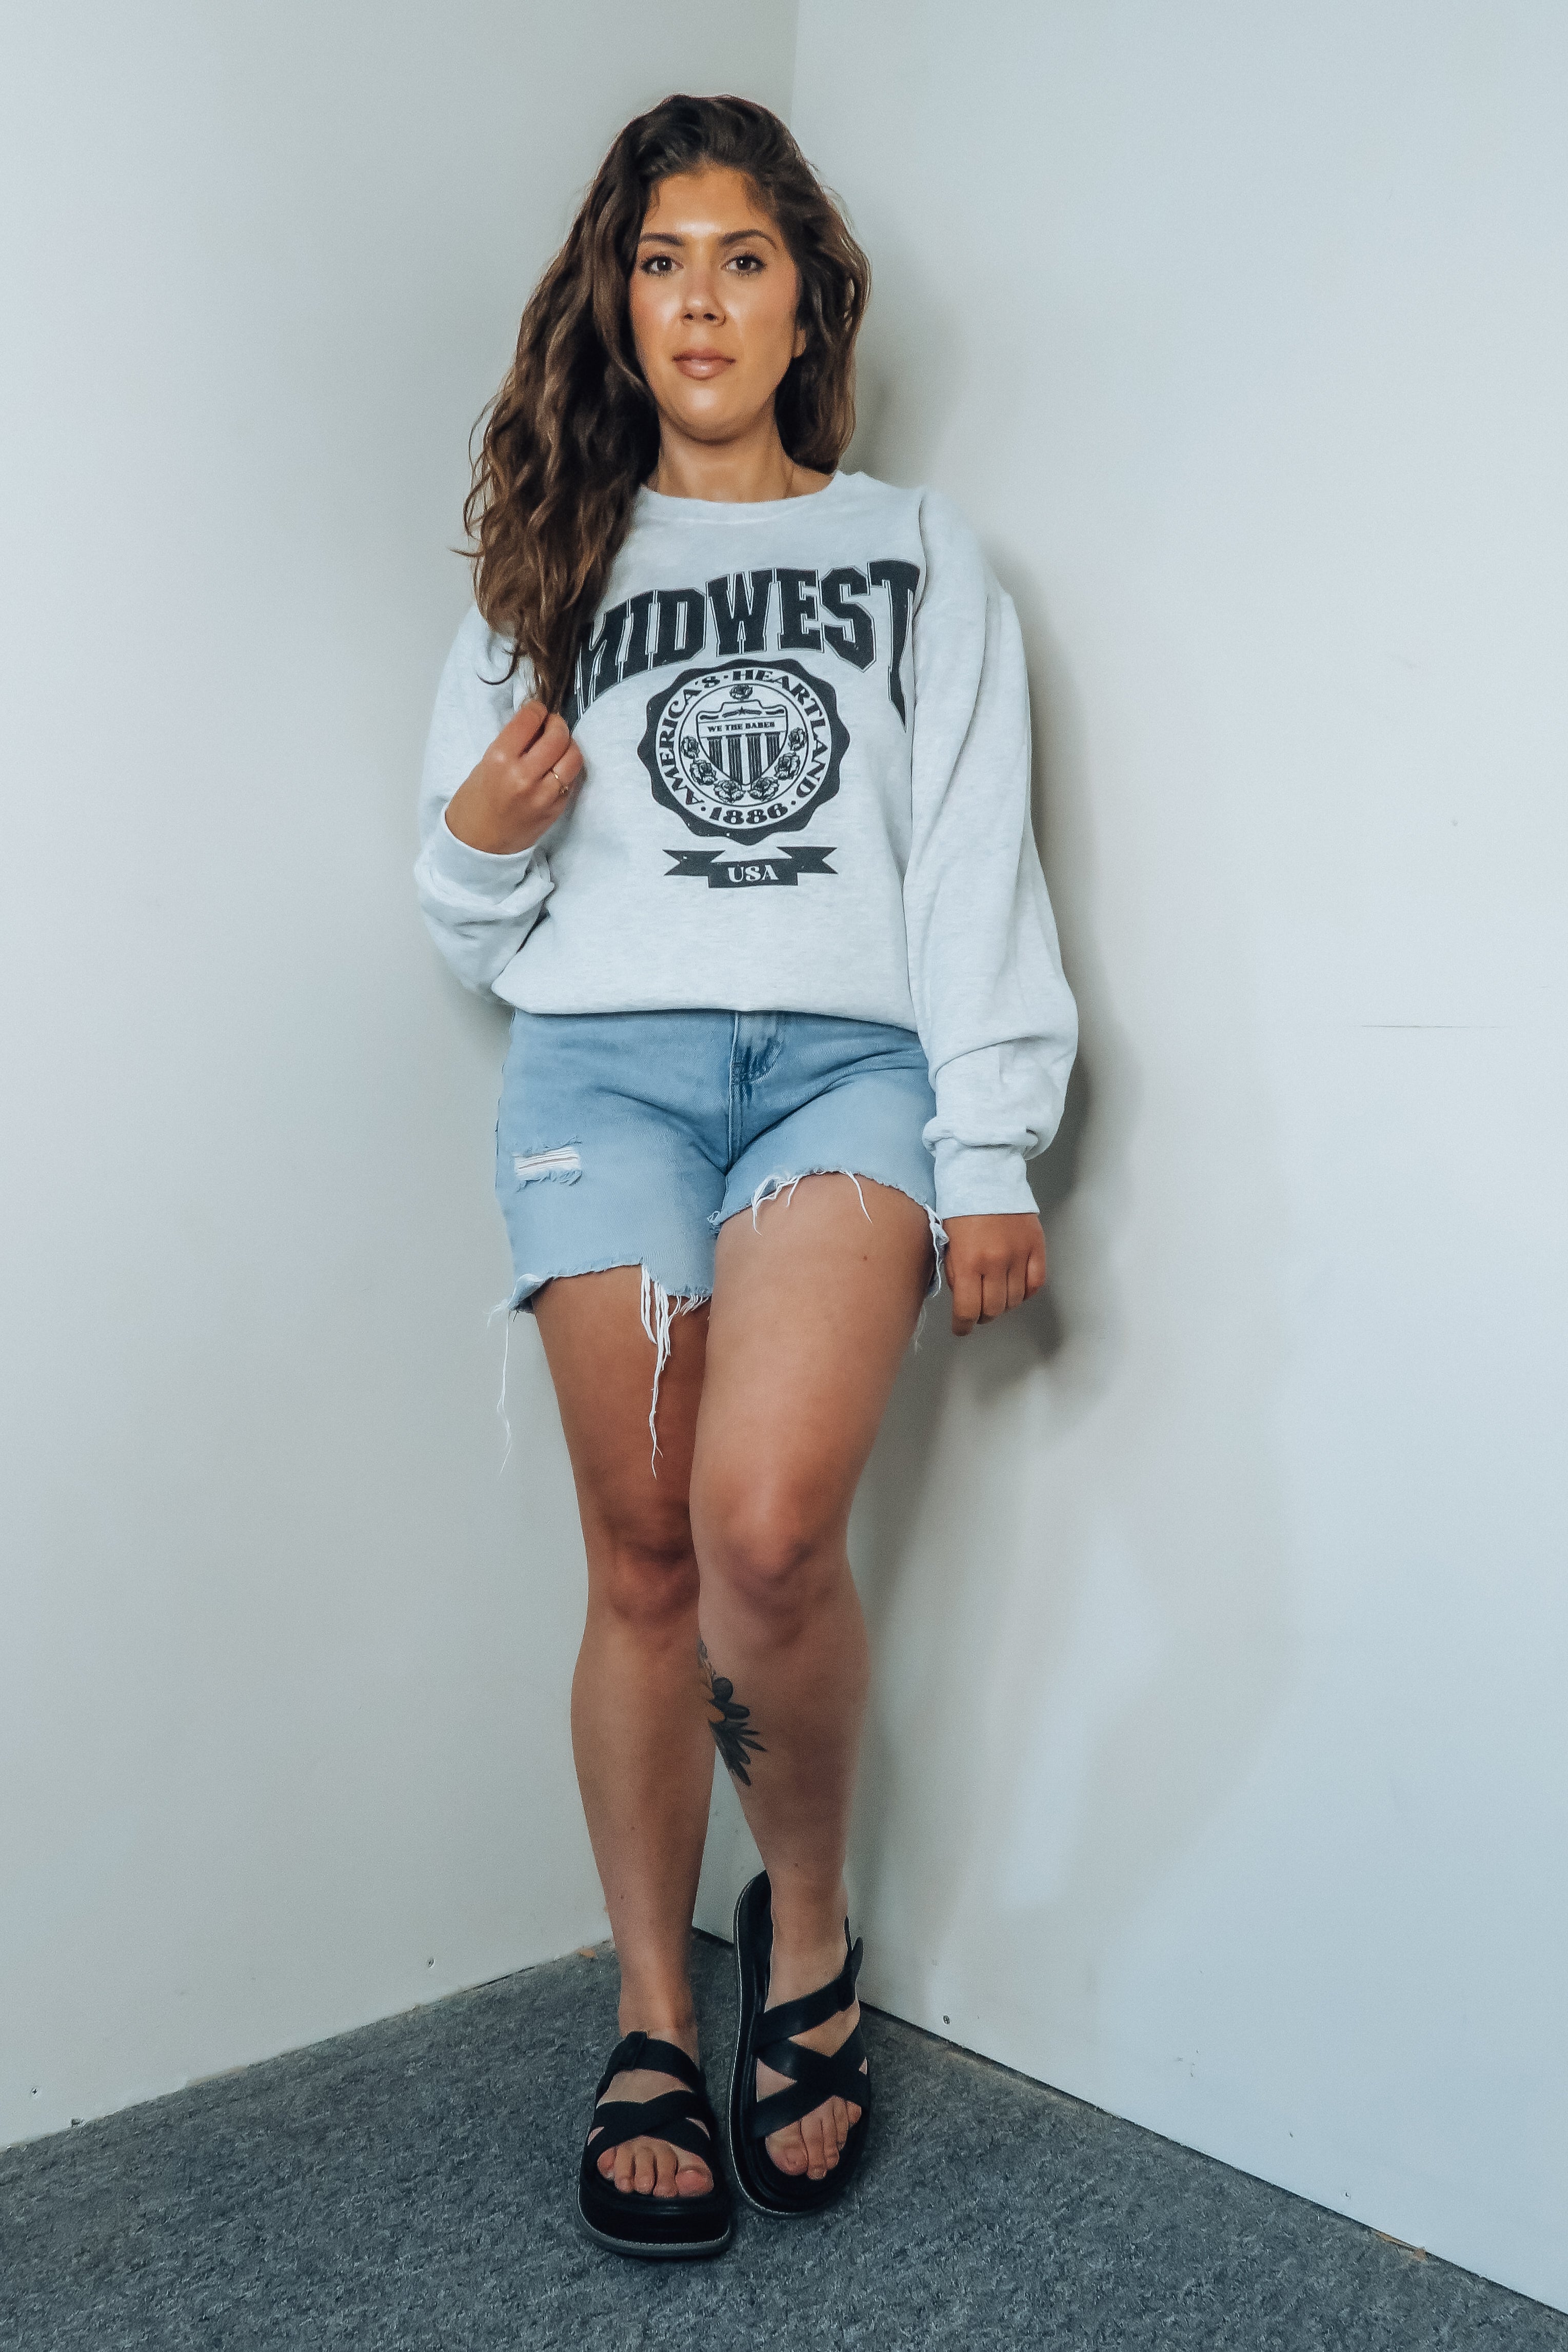 'Midwest' Graphic Sweatshirt - The Green Brick Boutique